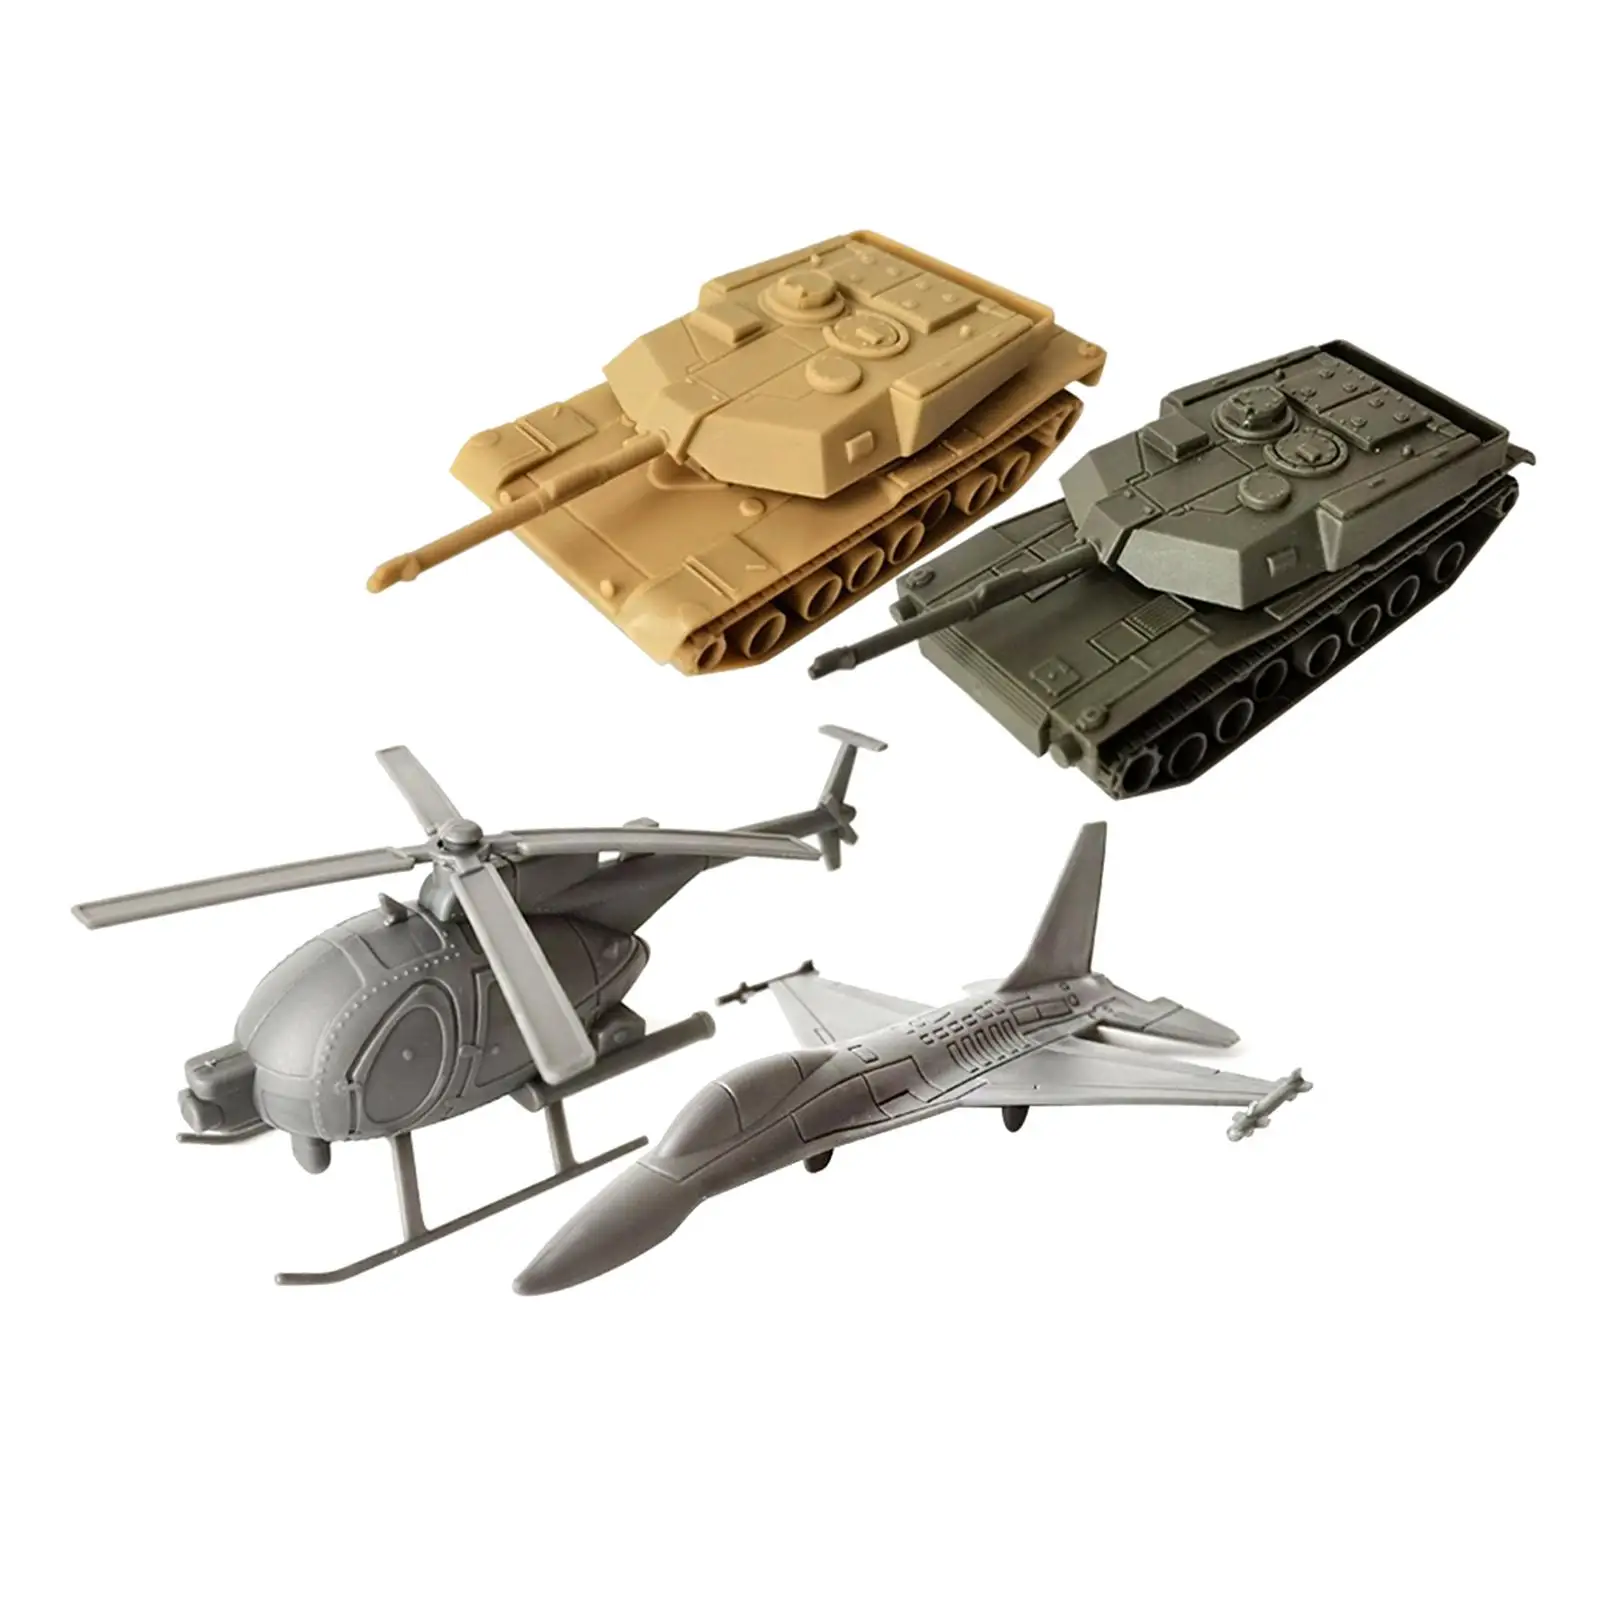 4x 3D Puzzles Helicopter and Fighter Display for Gift Education Toy Children